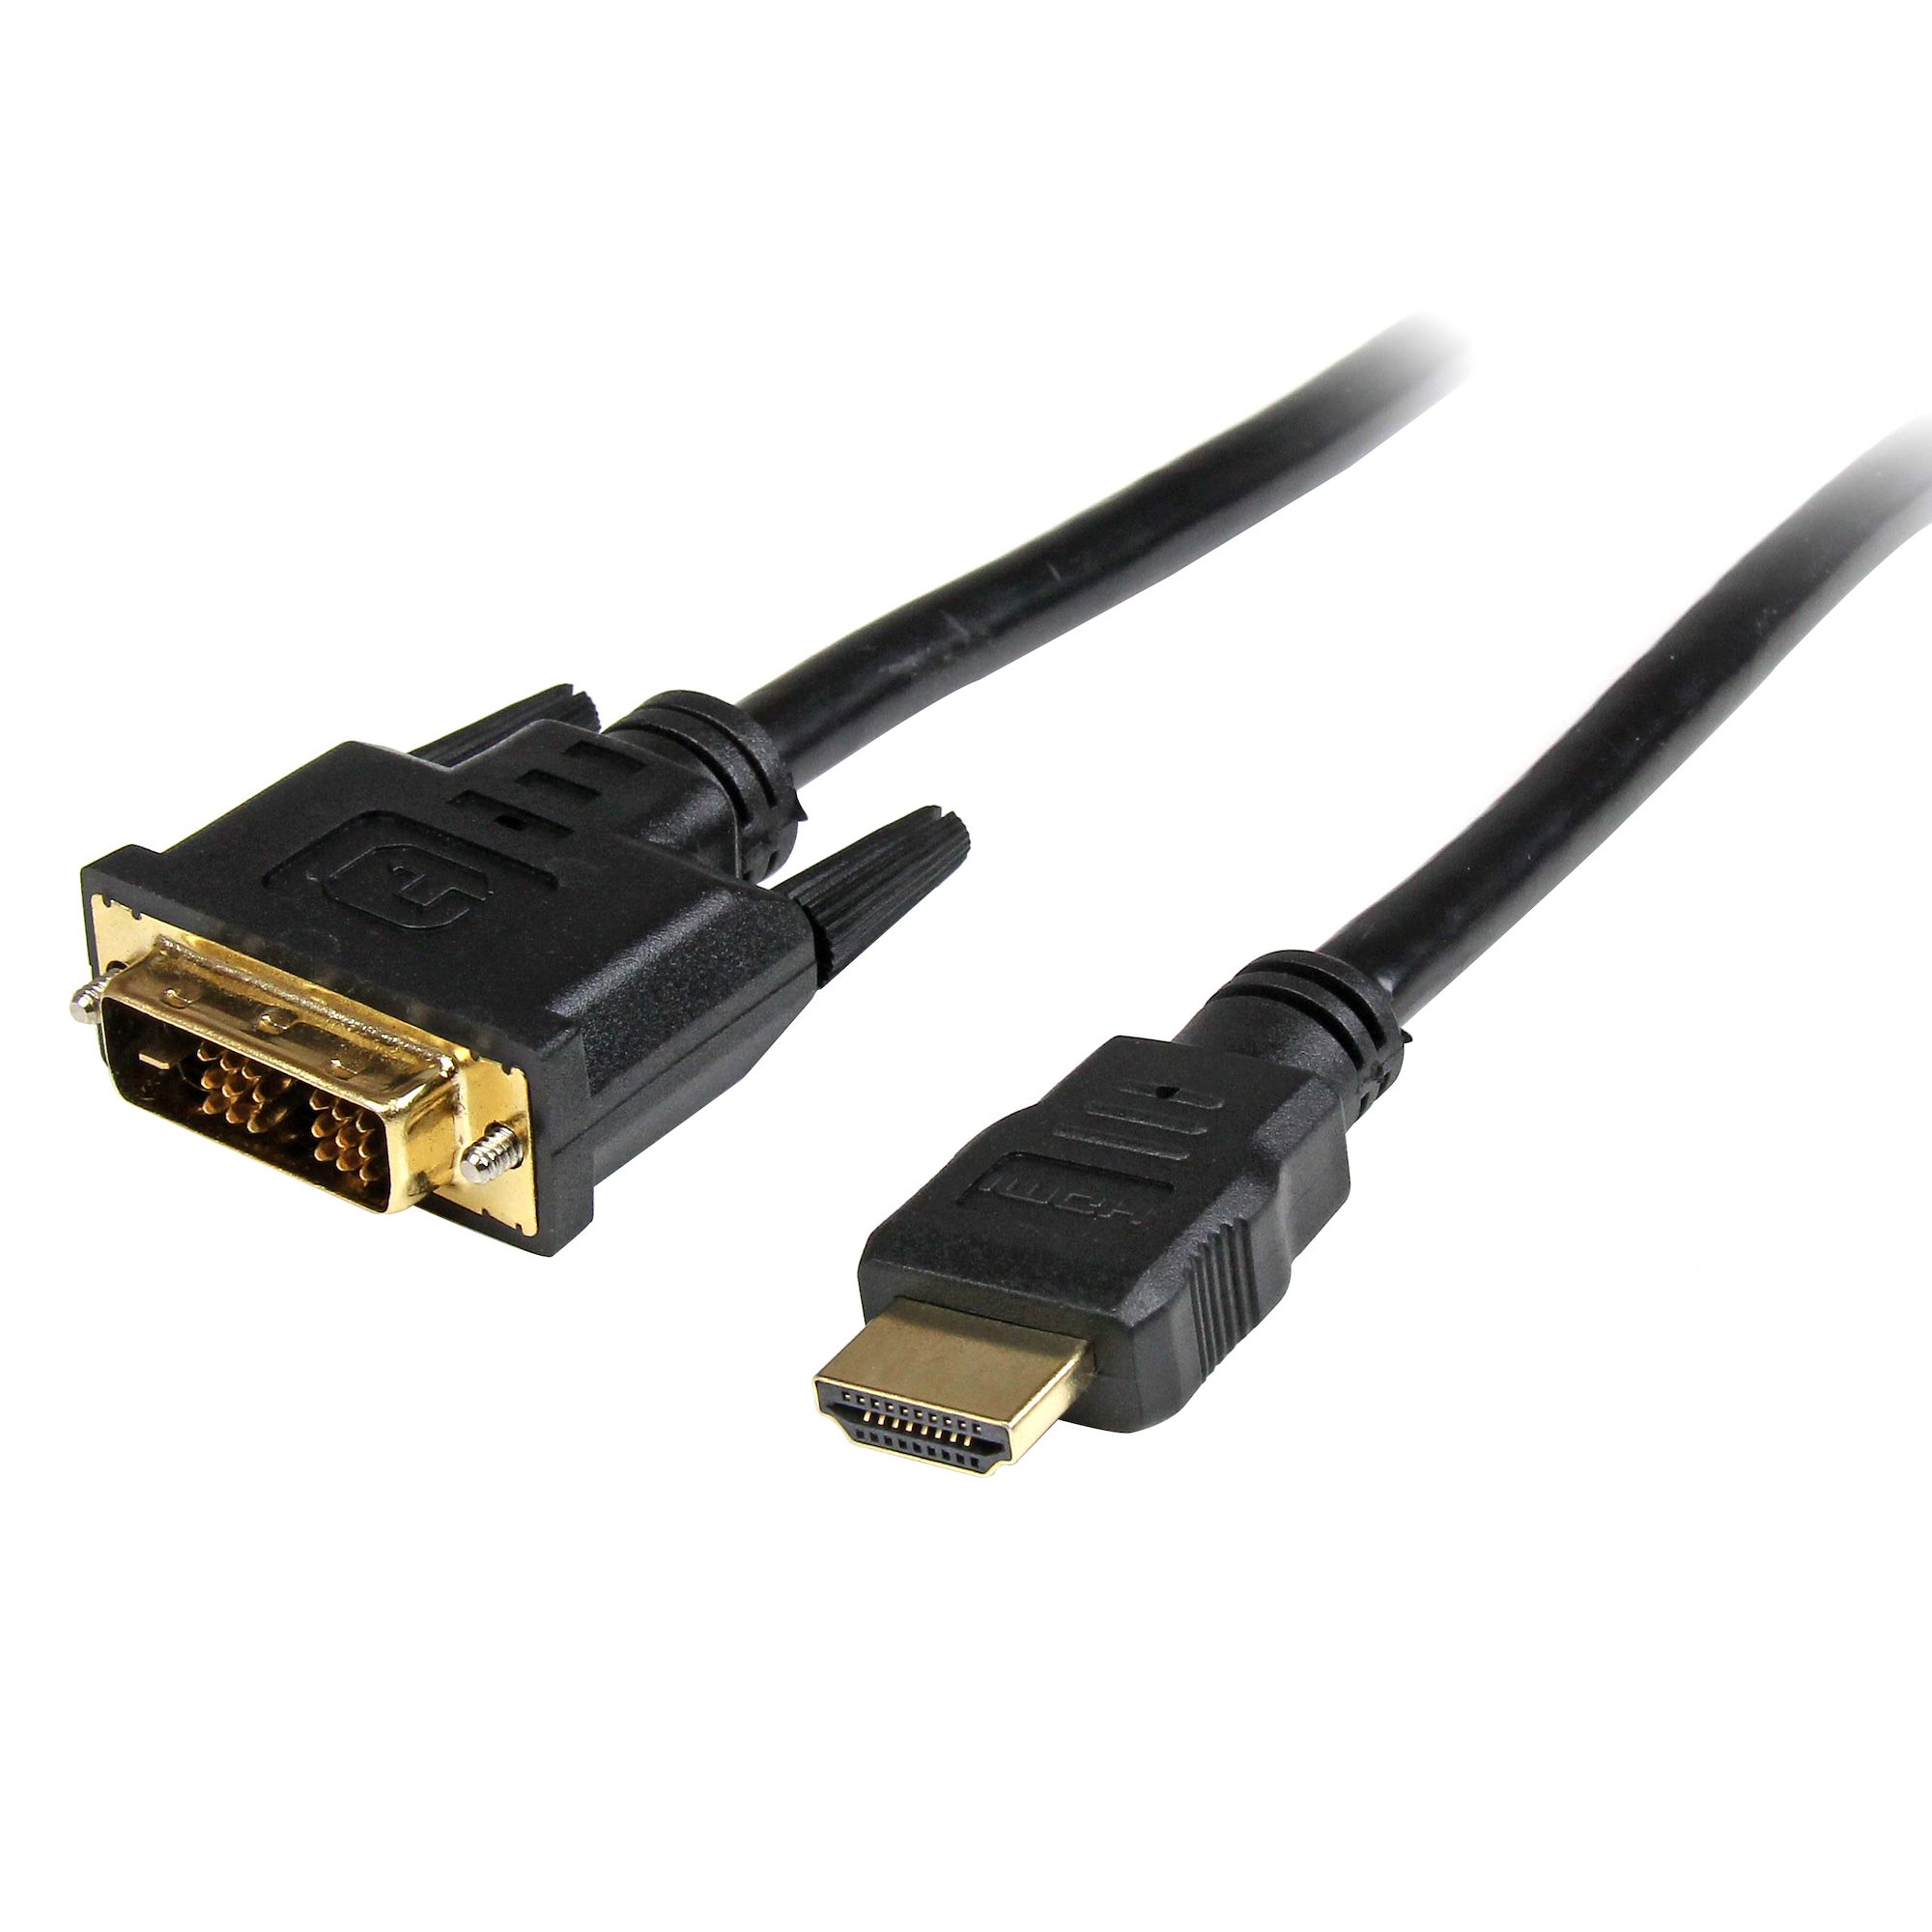 【HDDVIMM1M】1M HDMI TO DVI-D CABLE - M/M